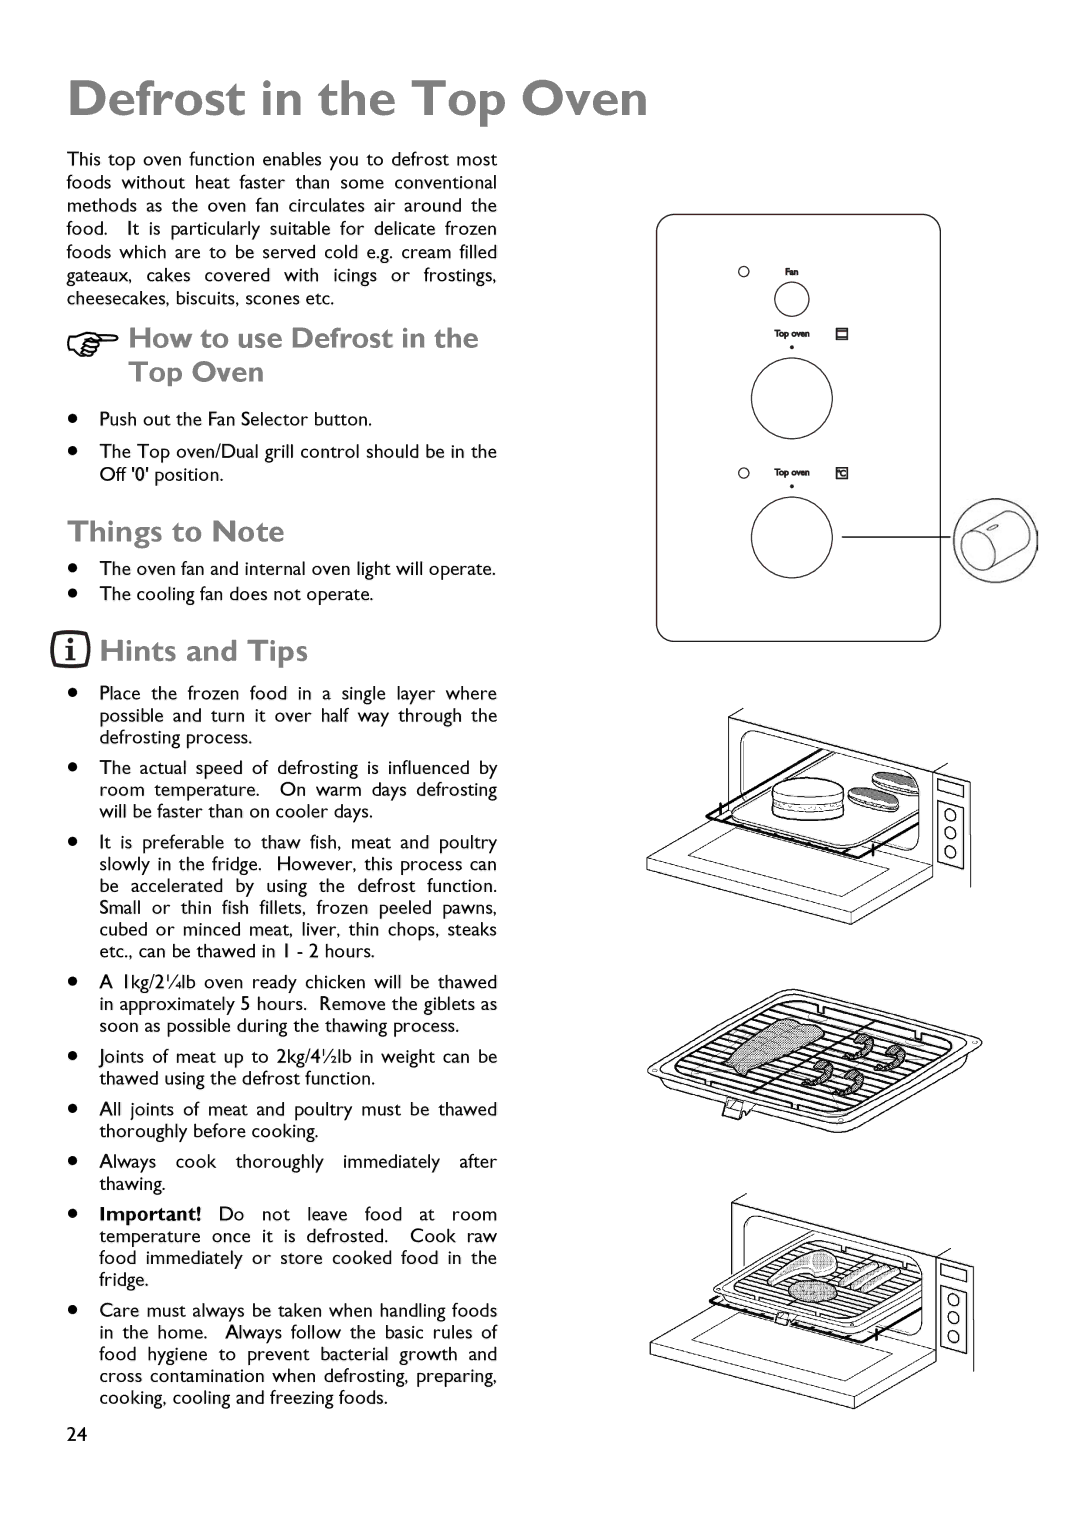 John Lewis JLDUOS705 instruction manual Defrost in the Top Oven, HowTop Ovento use Defrost 